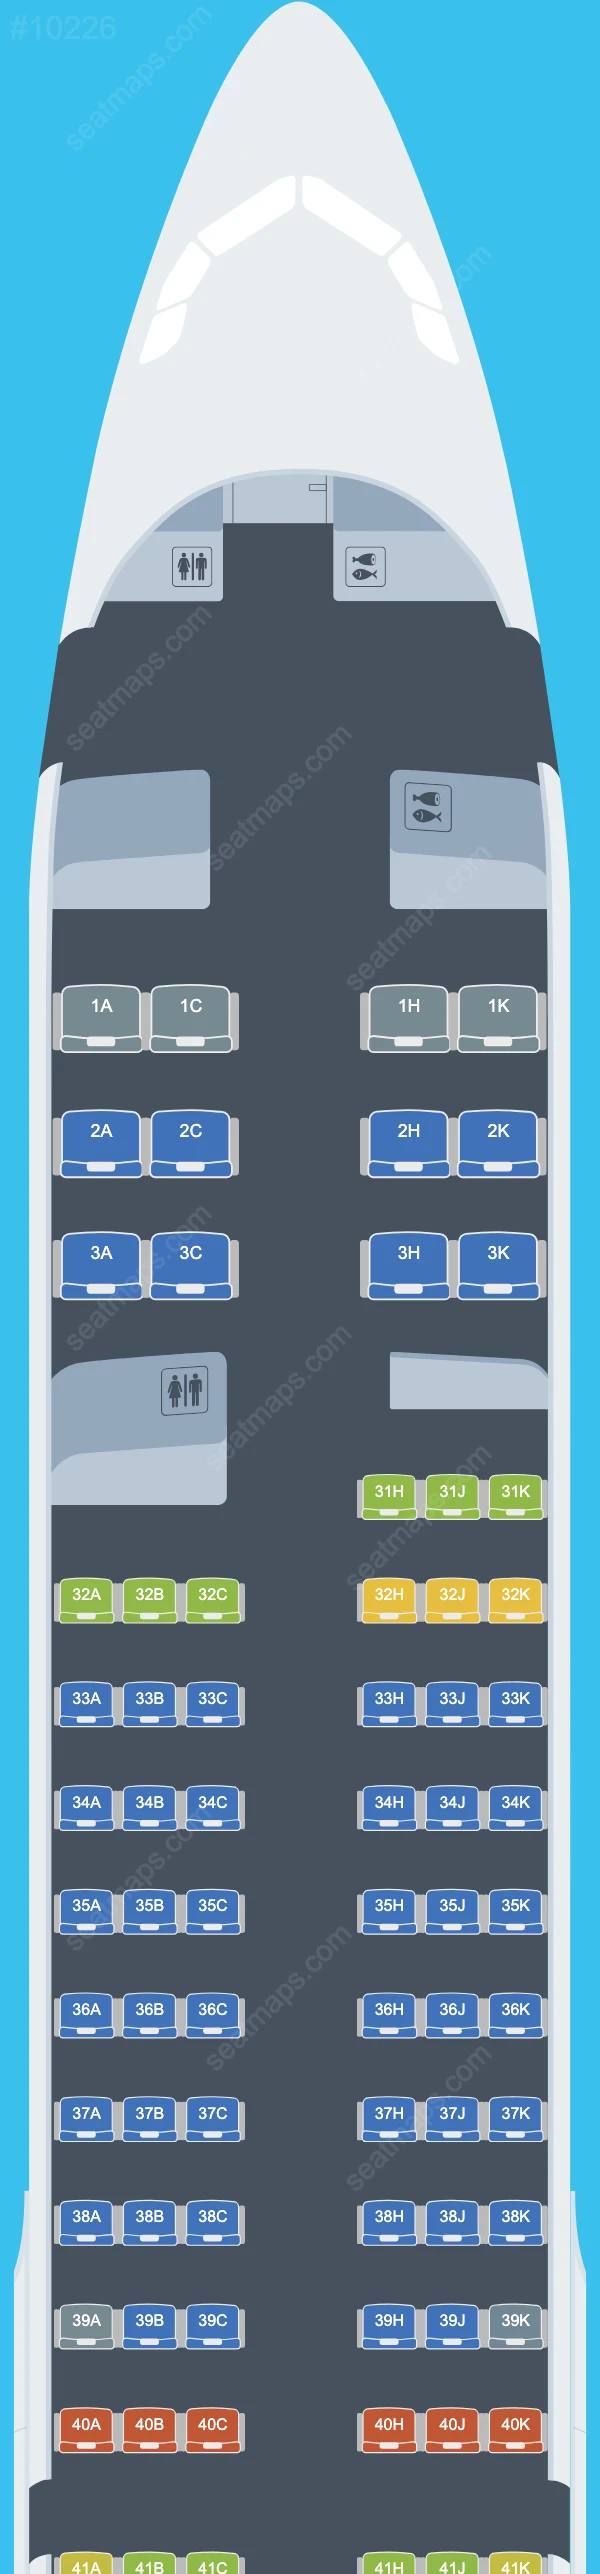 Philippine Airlines (PAL) Airbus A321 Seat Maps A321-200neo